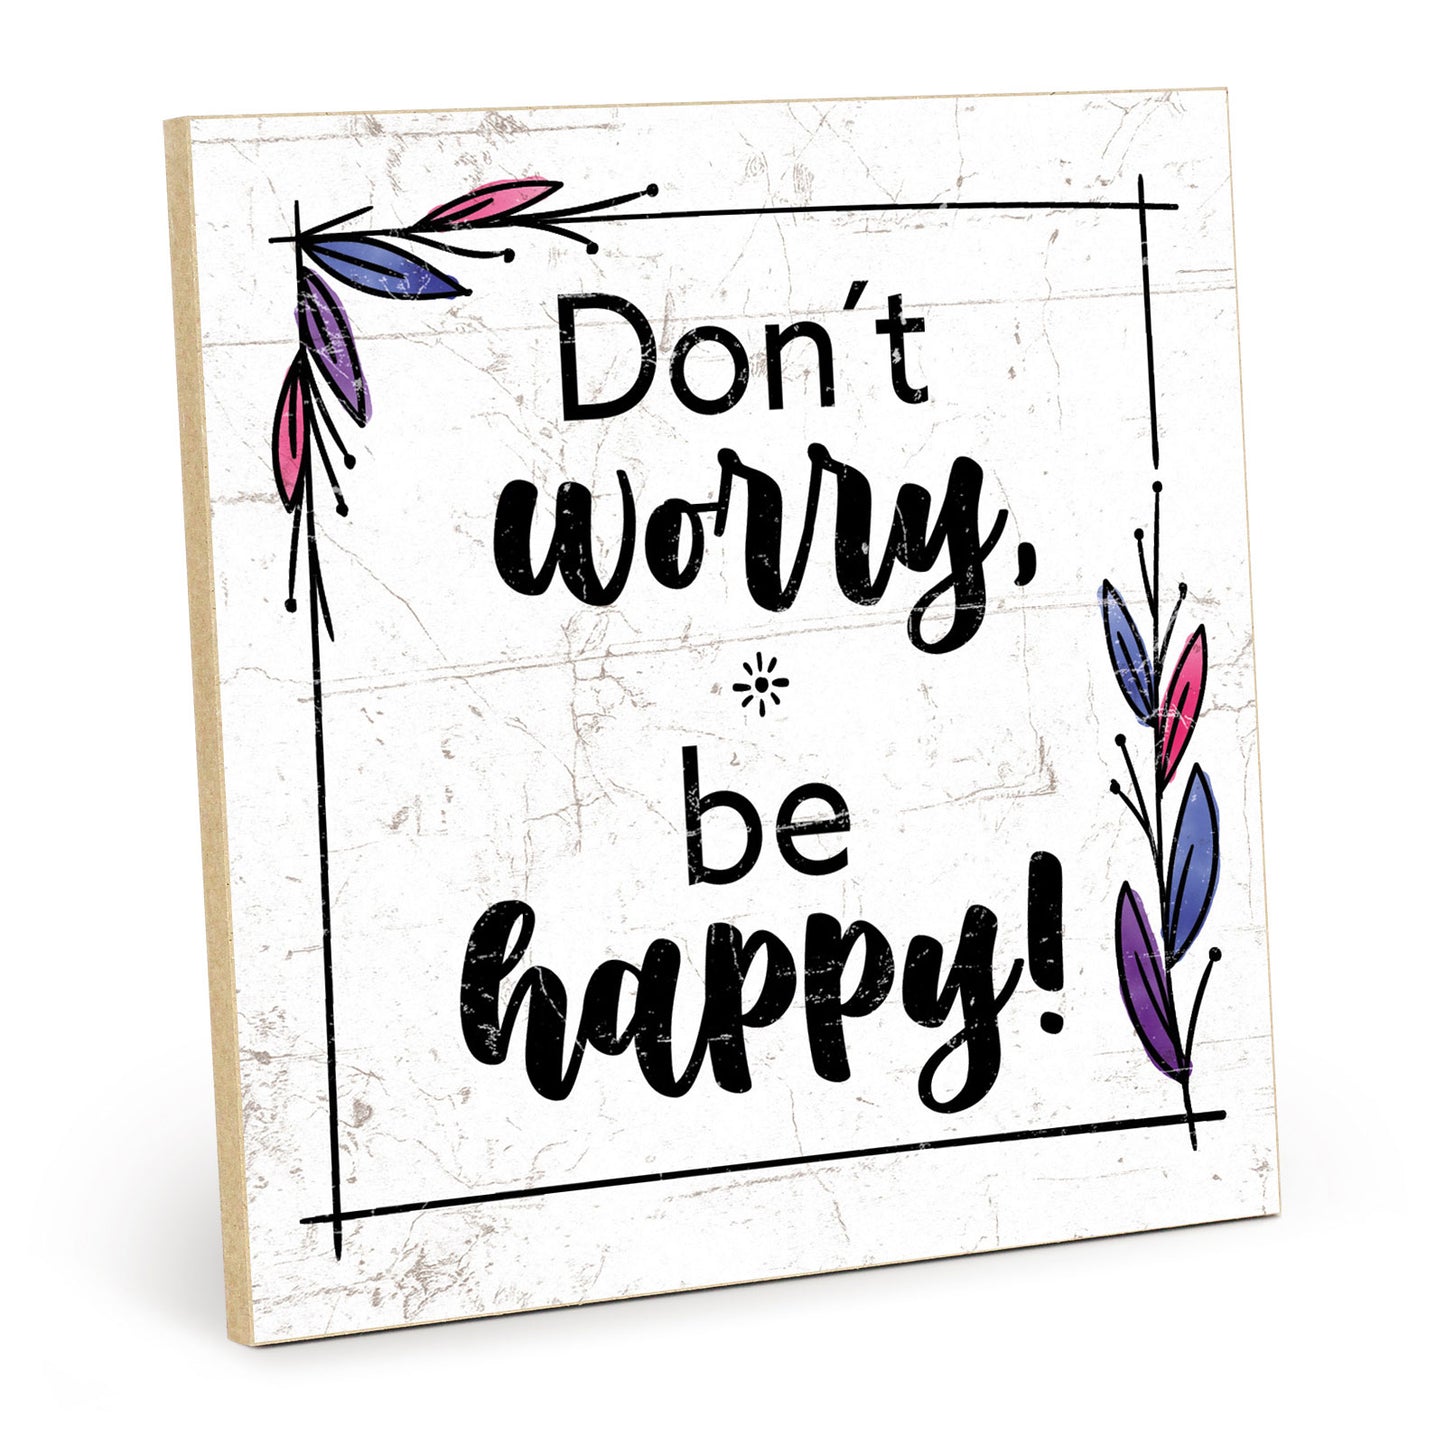 Holzschild mit Spruch - Hygge - Dont worry be happy – HS-QN-00942